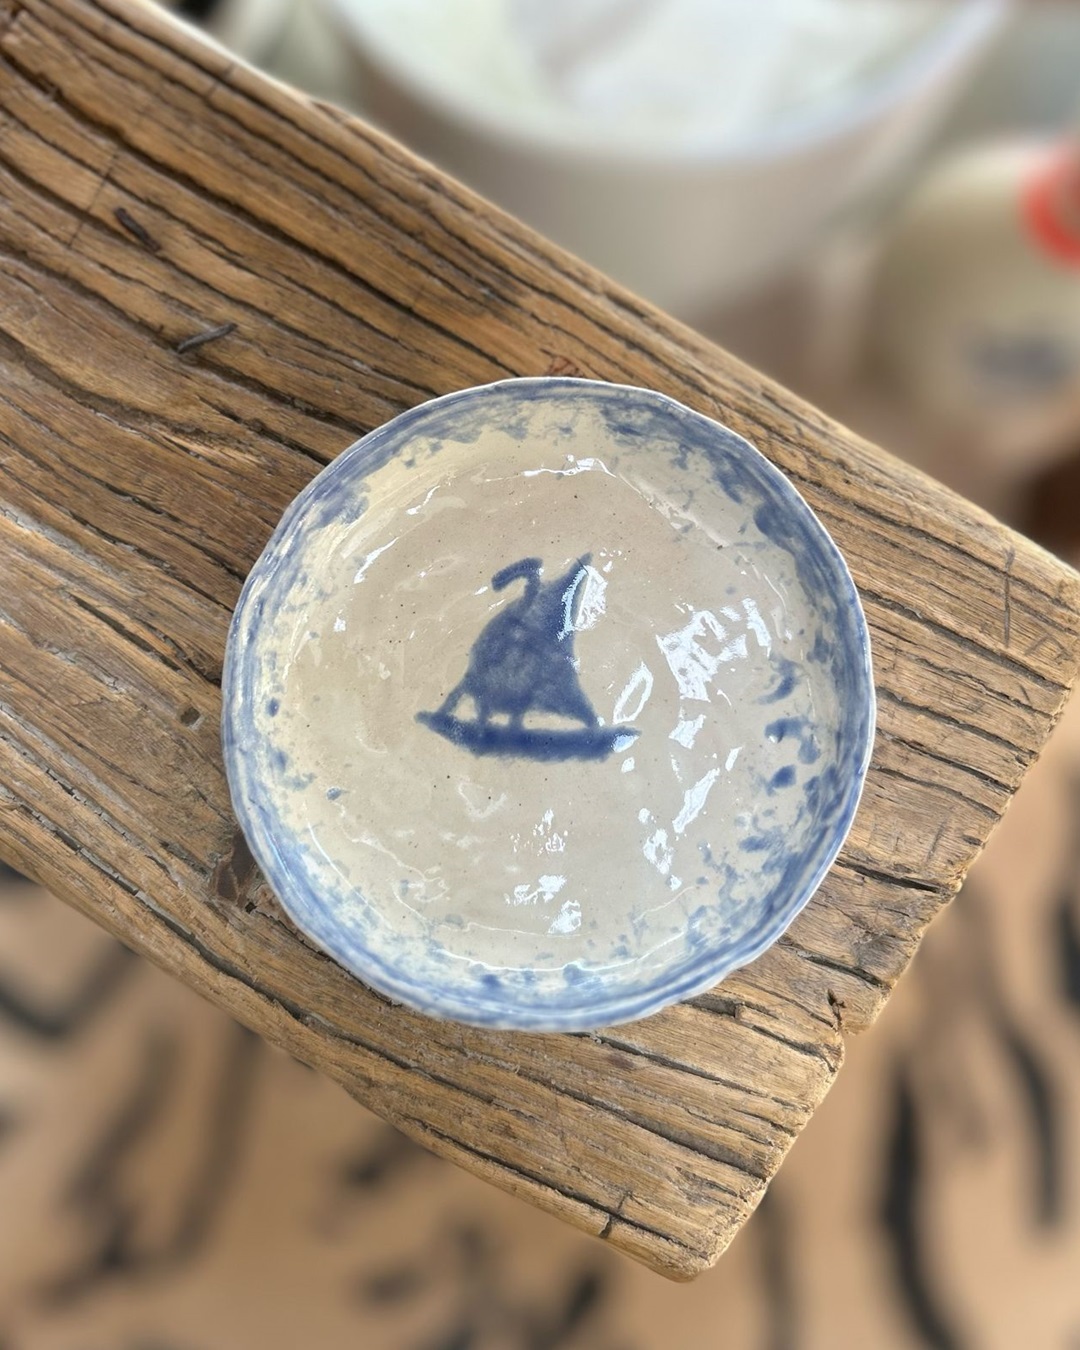 Plate with boat image in blue on it on wooden table